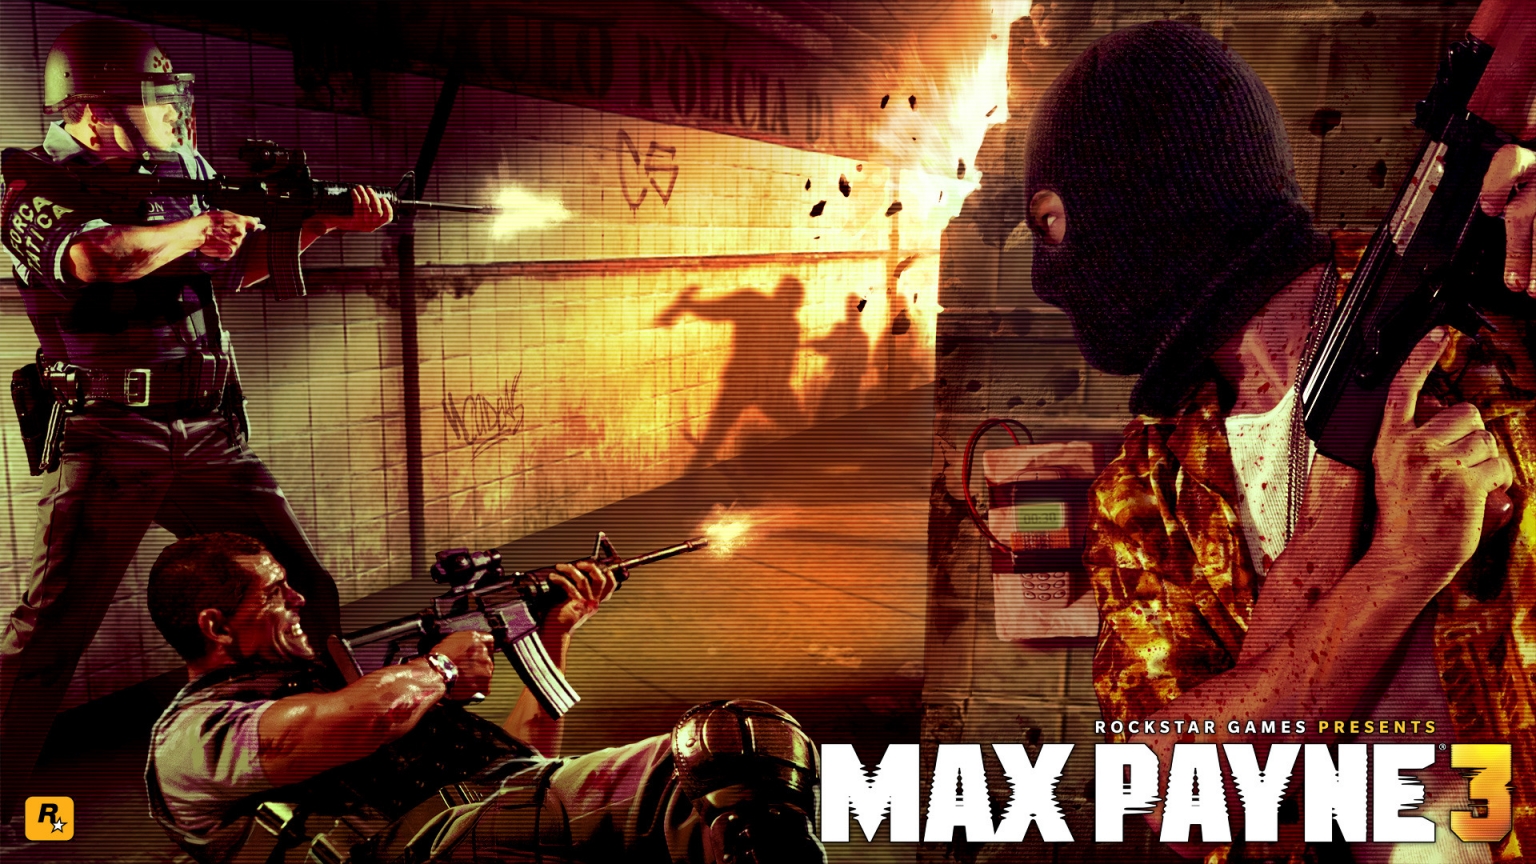 Maxpayne3 Local Justice for 1536 x 864 HDTV resolution